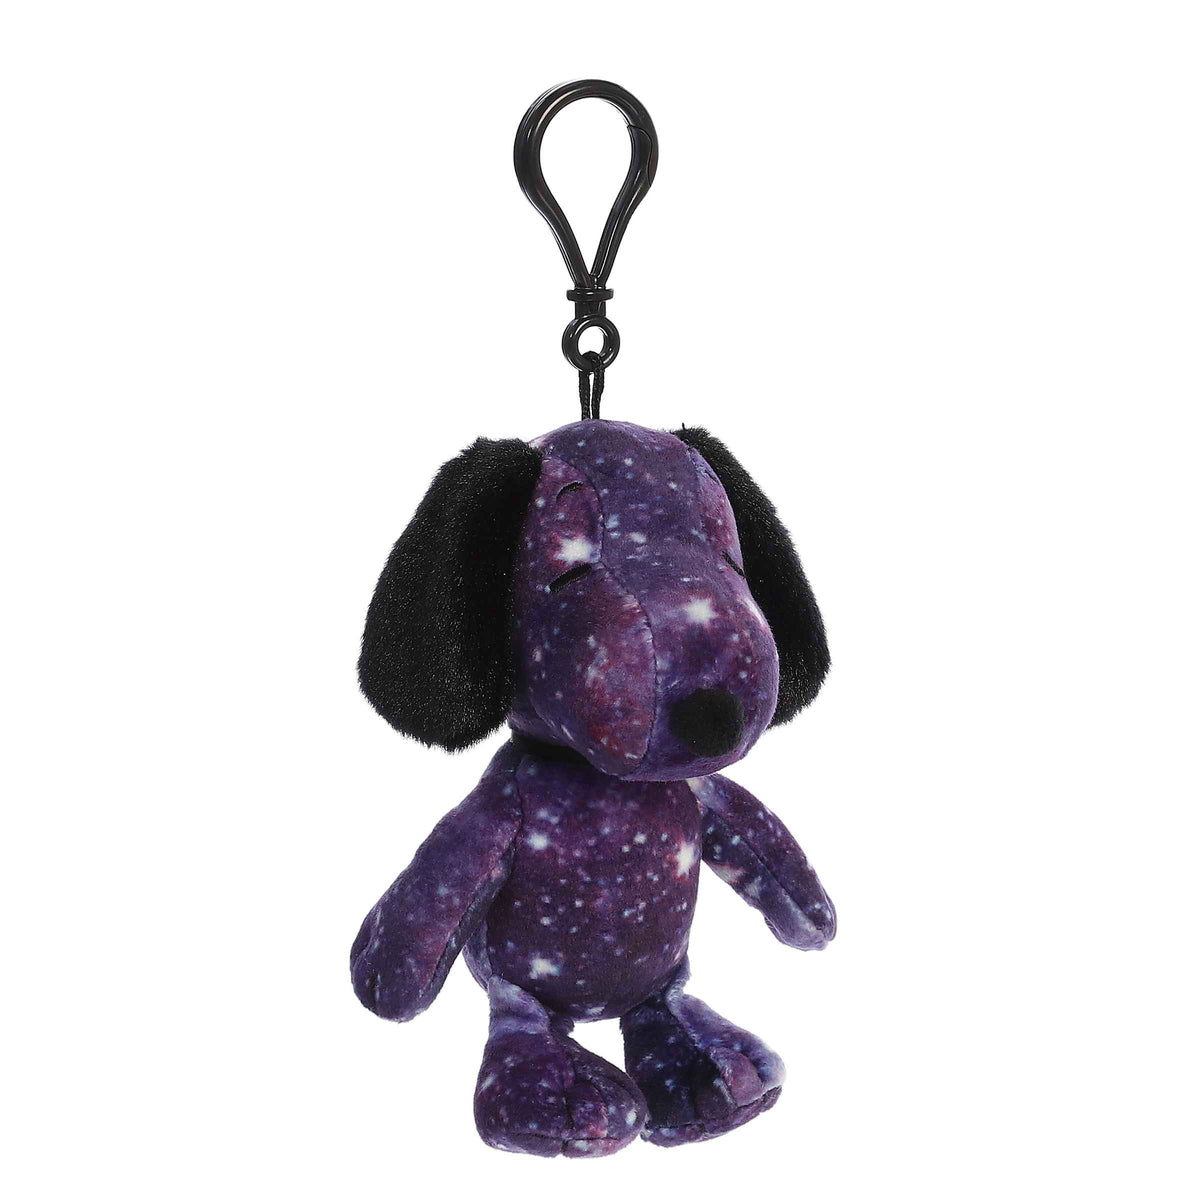 Spaced Out Snoopy plush keychain with galaxy pattern from the Peanuts plush collection, perfect for space lovers